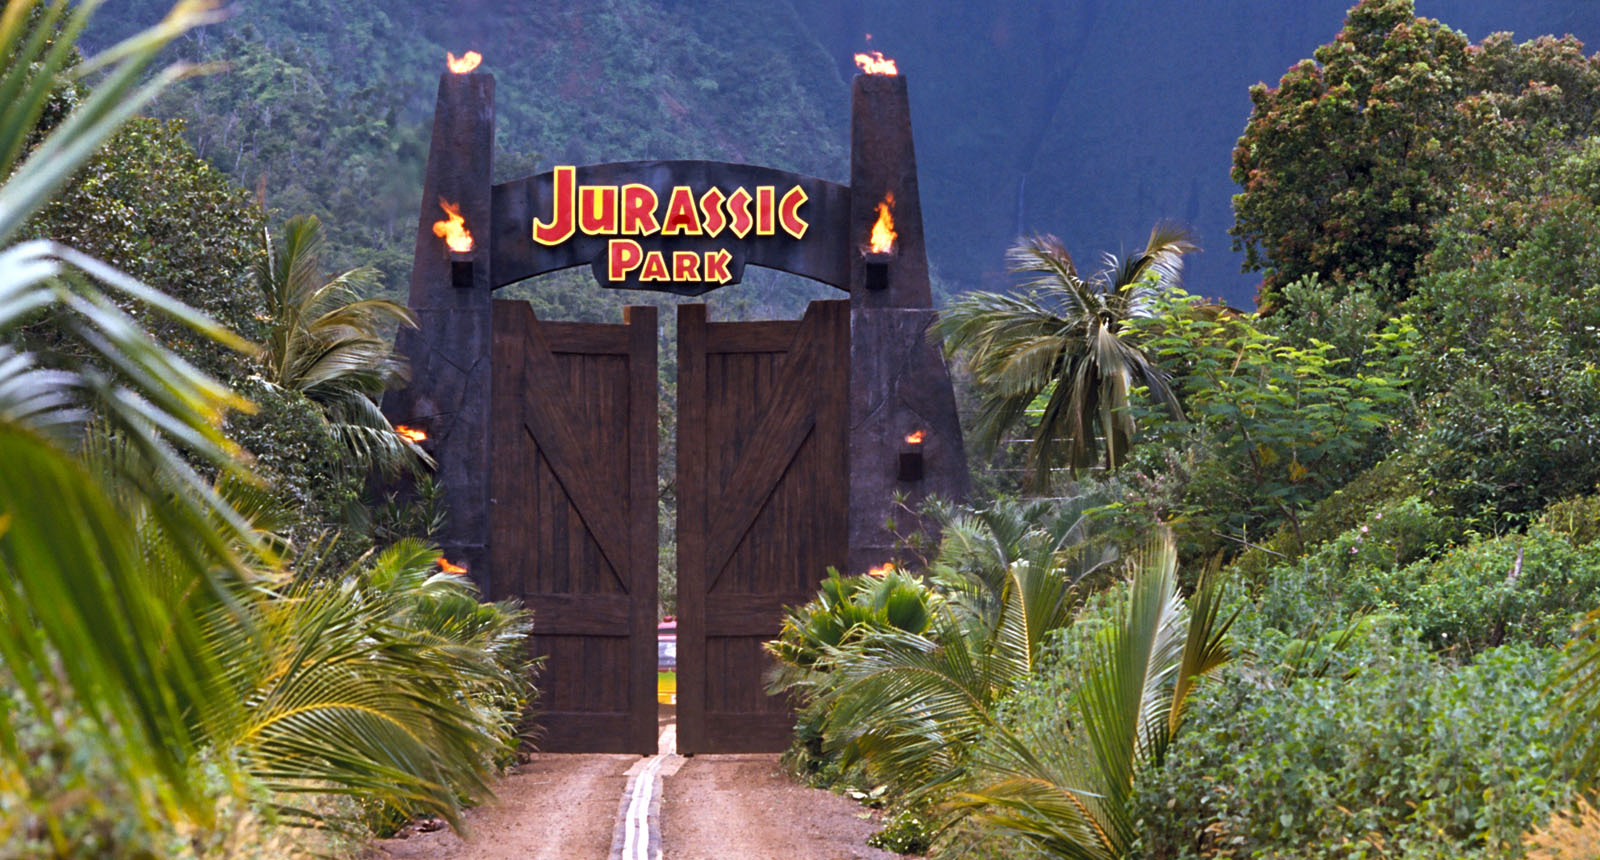 can you visit the jurassic park gate